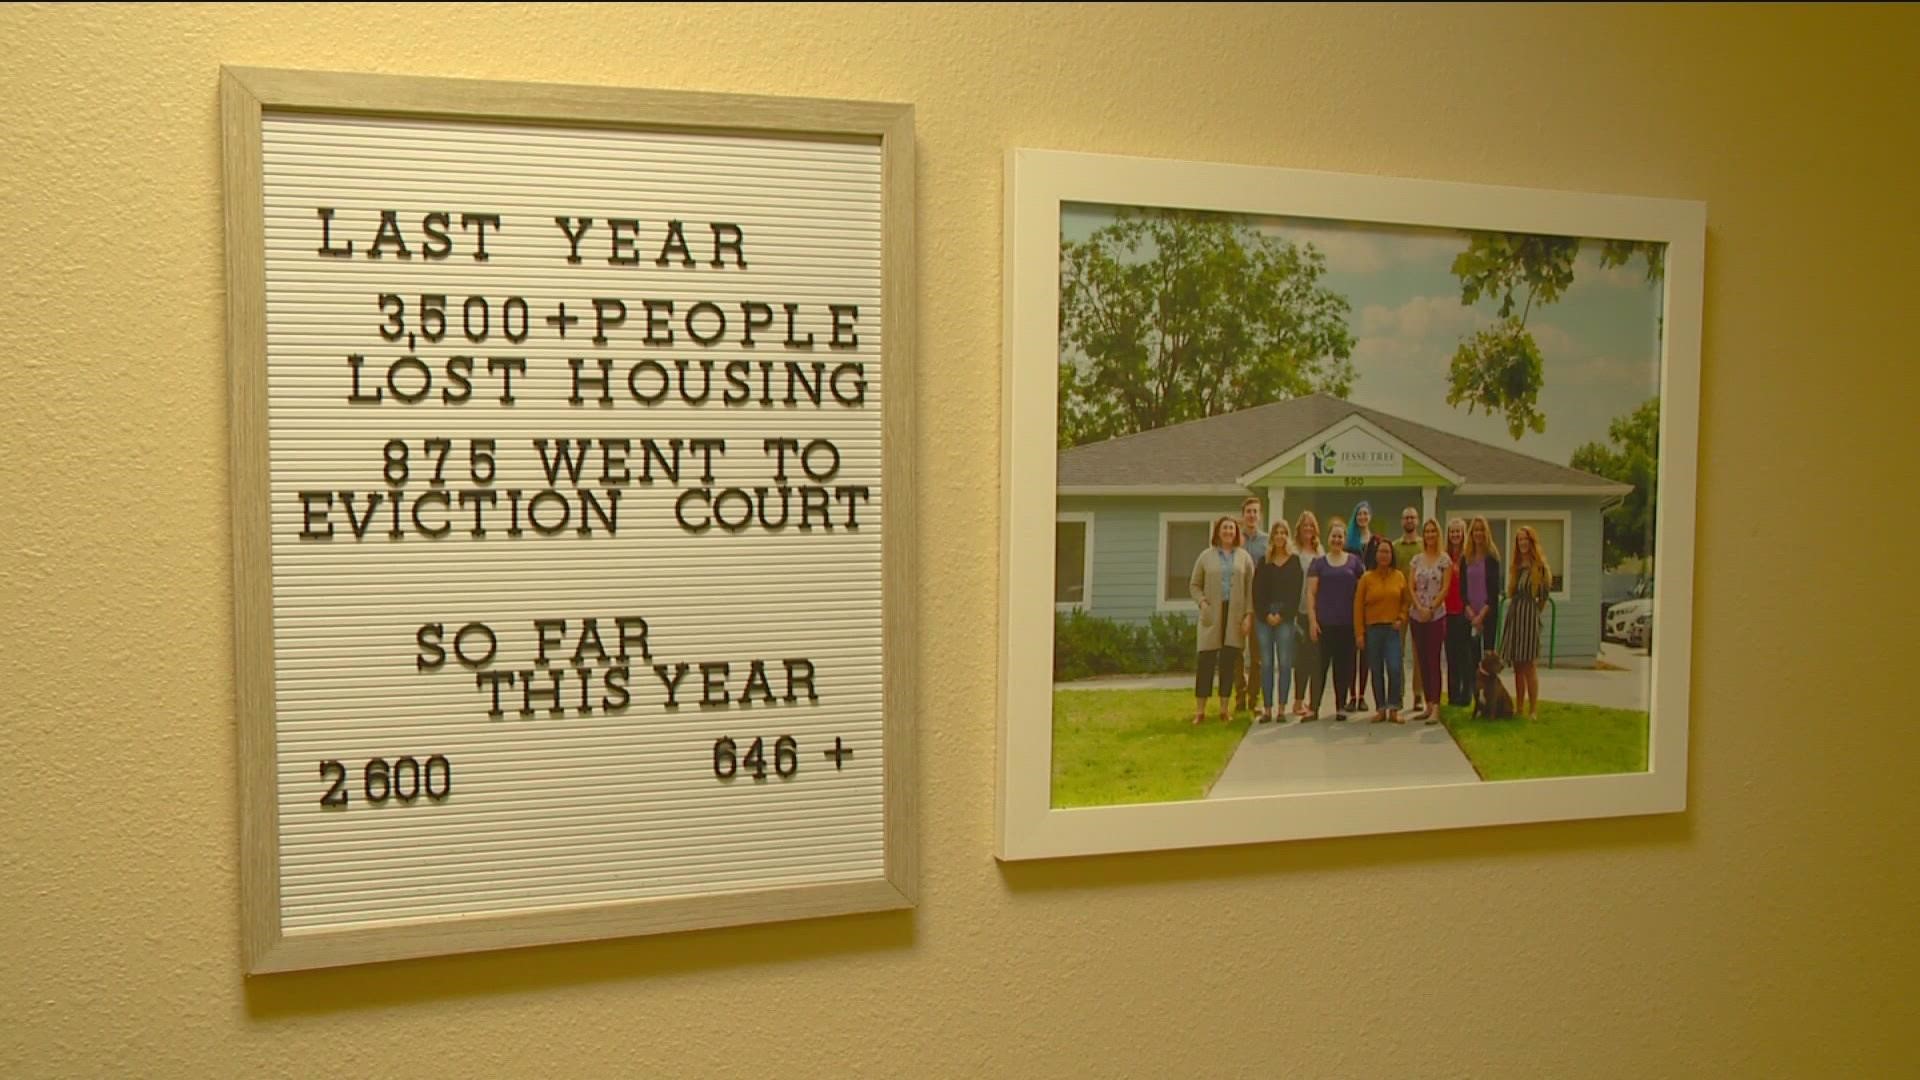 Jesse Tree helps people facing eviction to stay in their home.